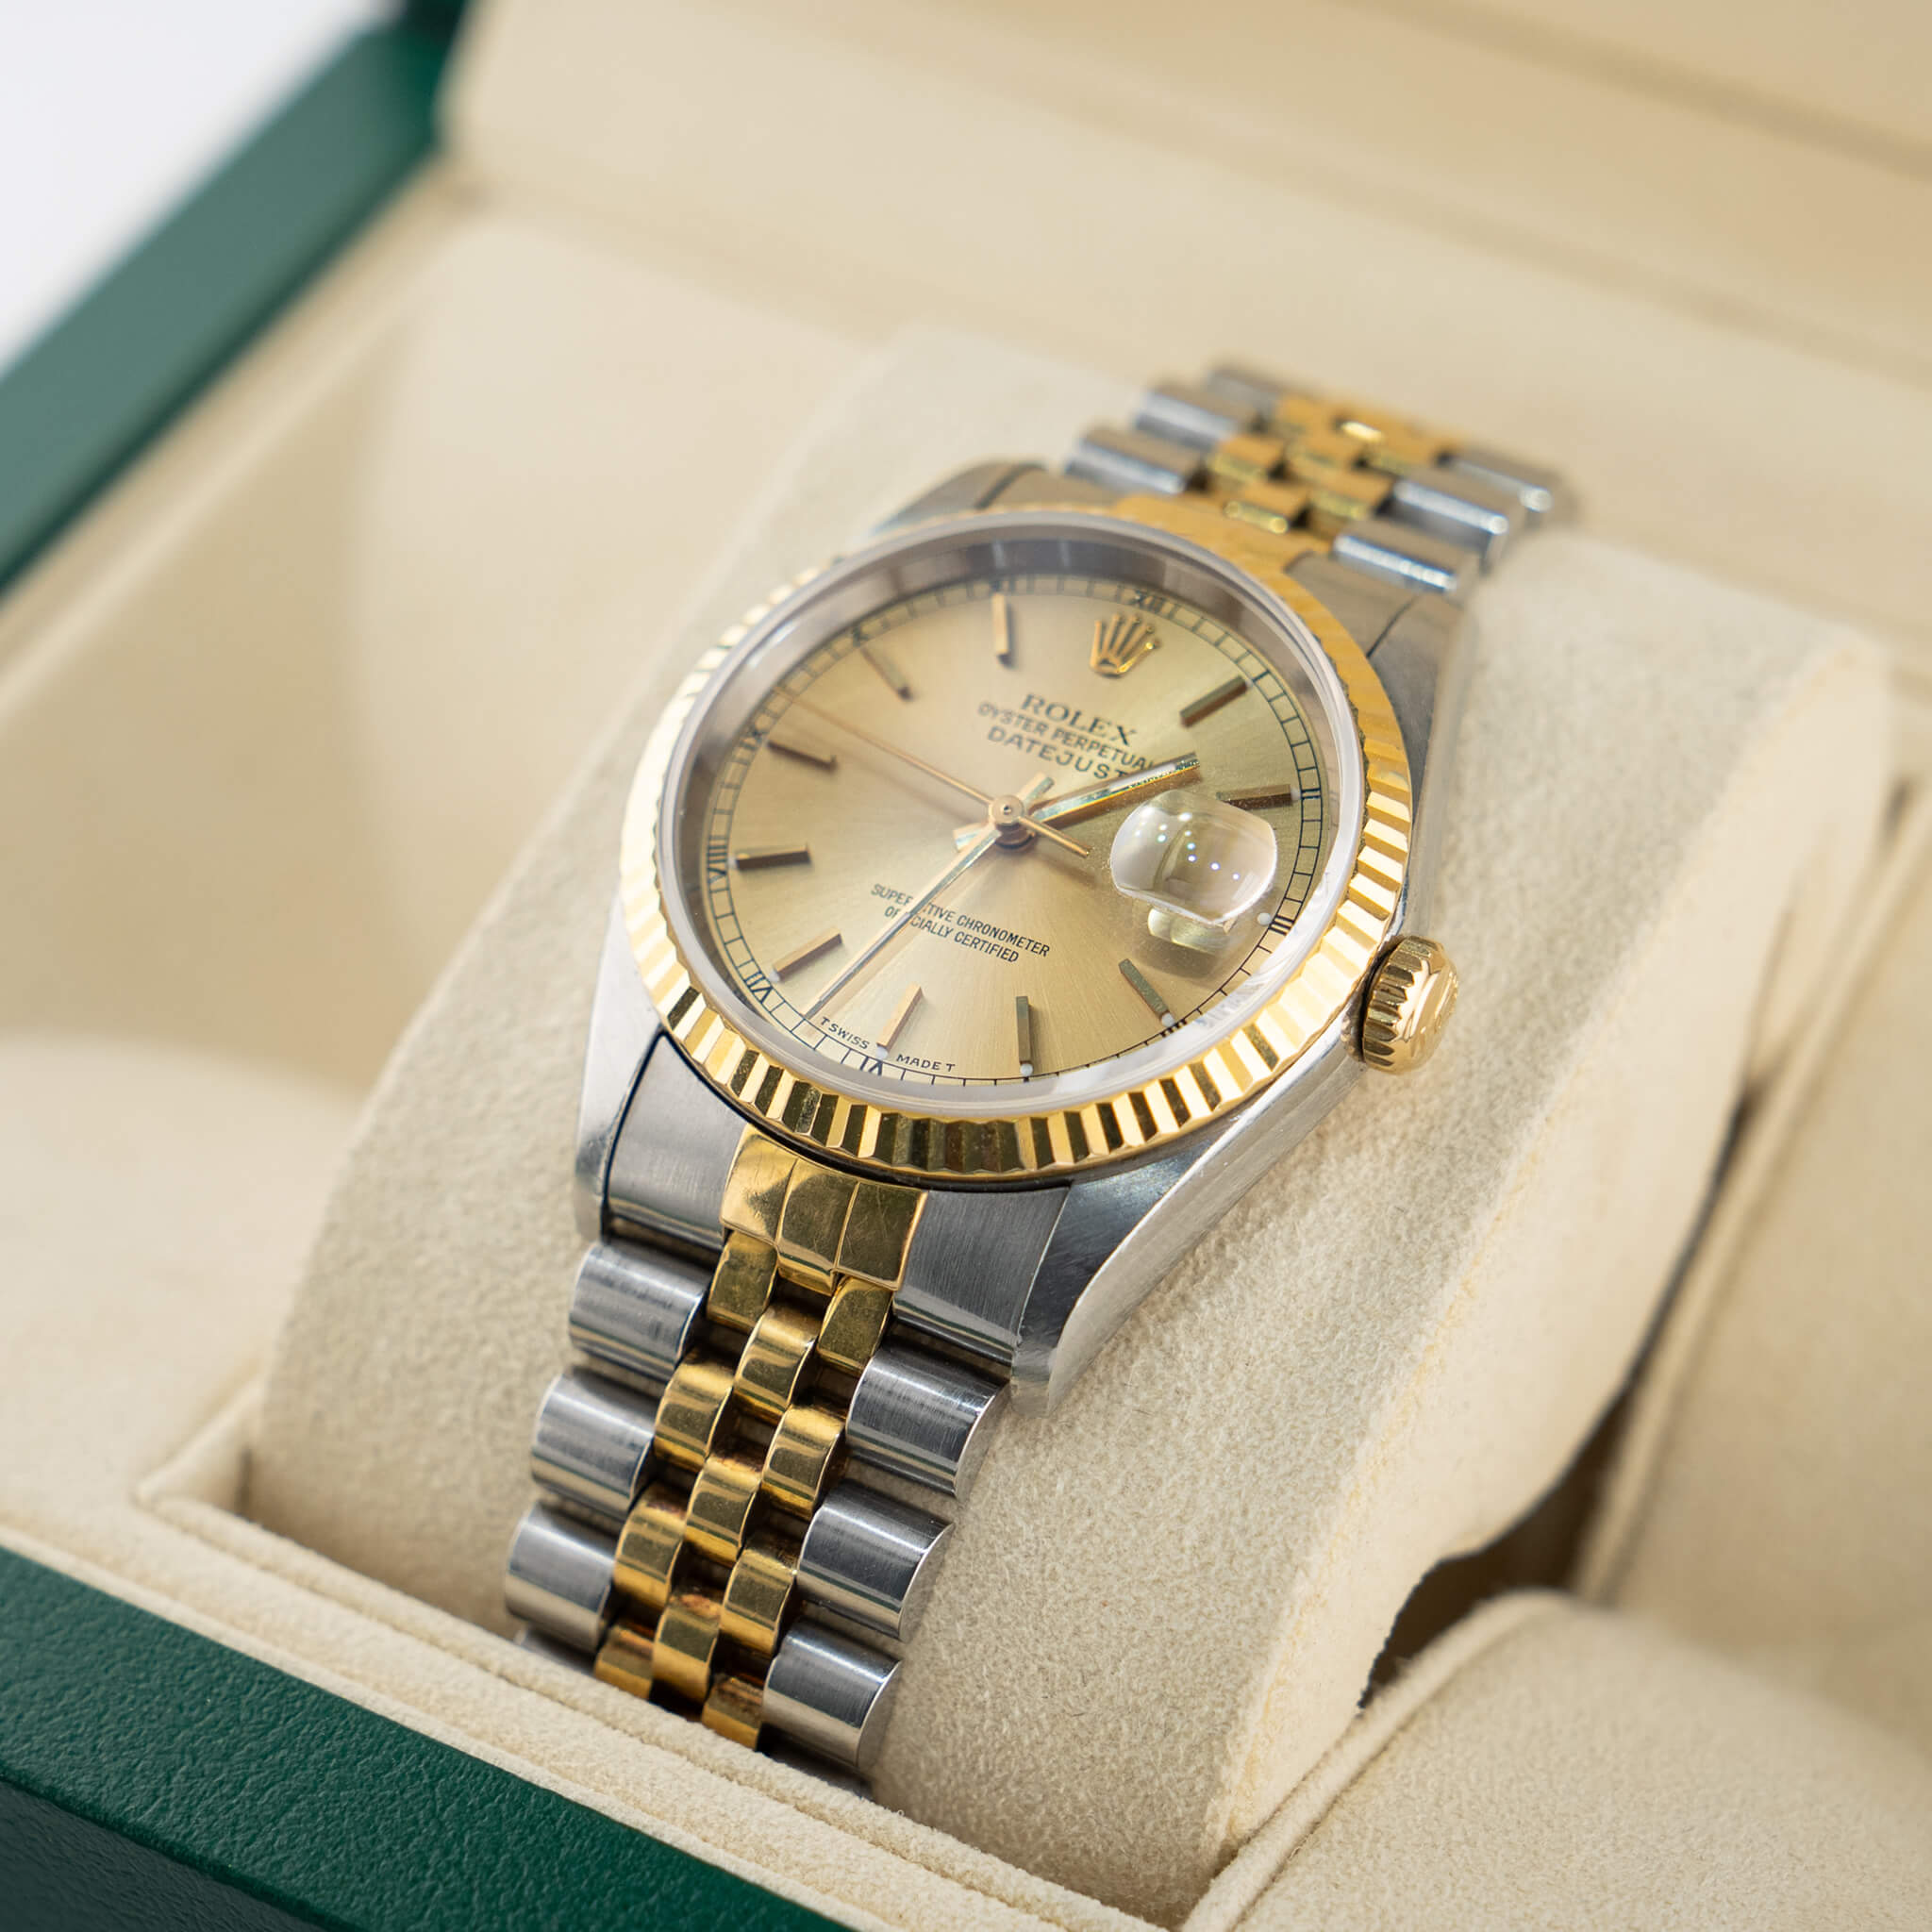 ROLEX DATEJUST 36MM CHAMPAGNE DIAL 1995